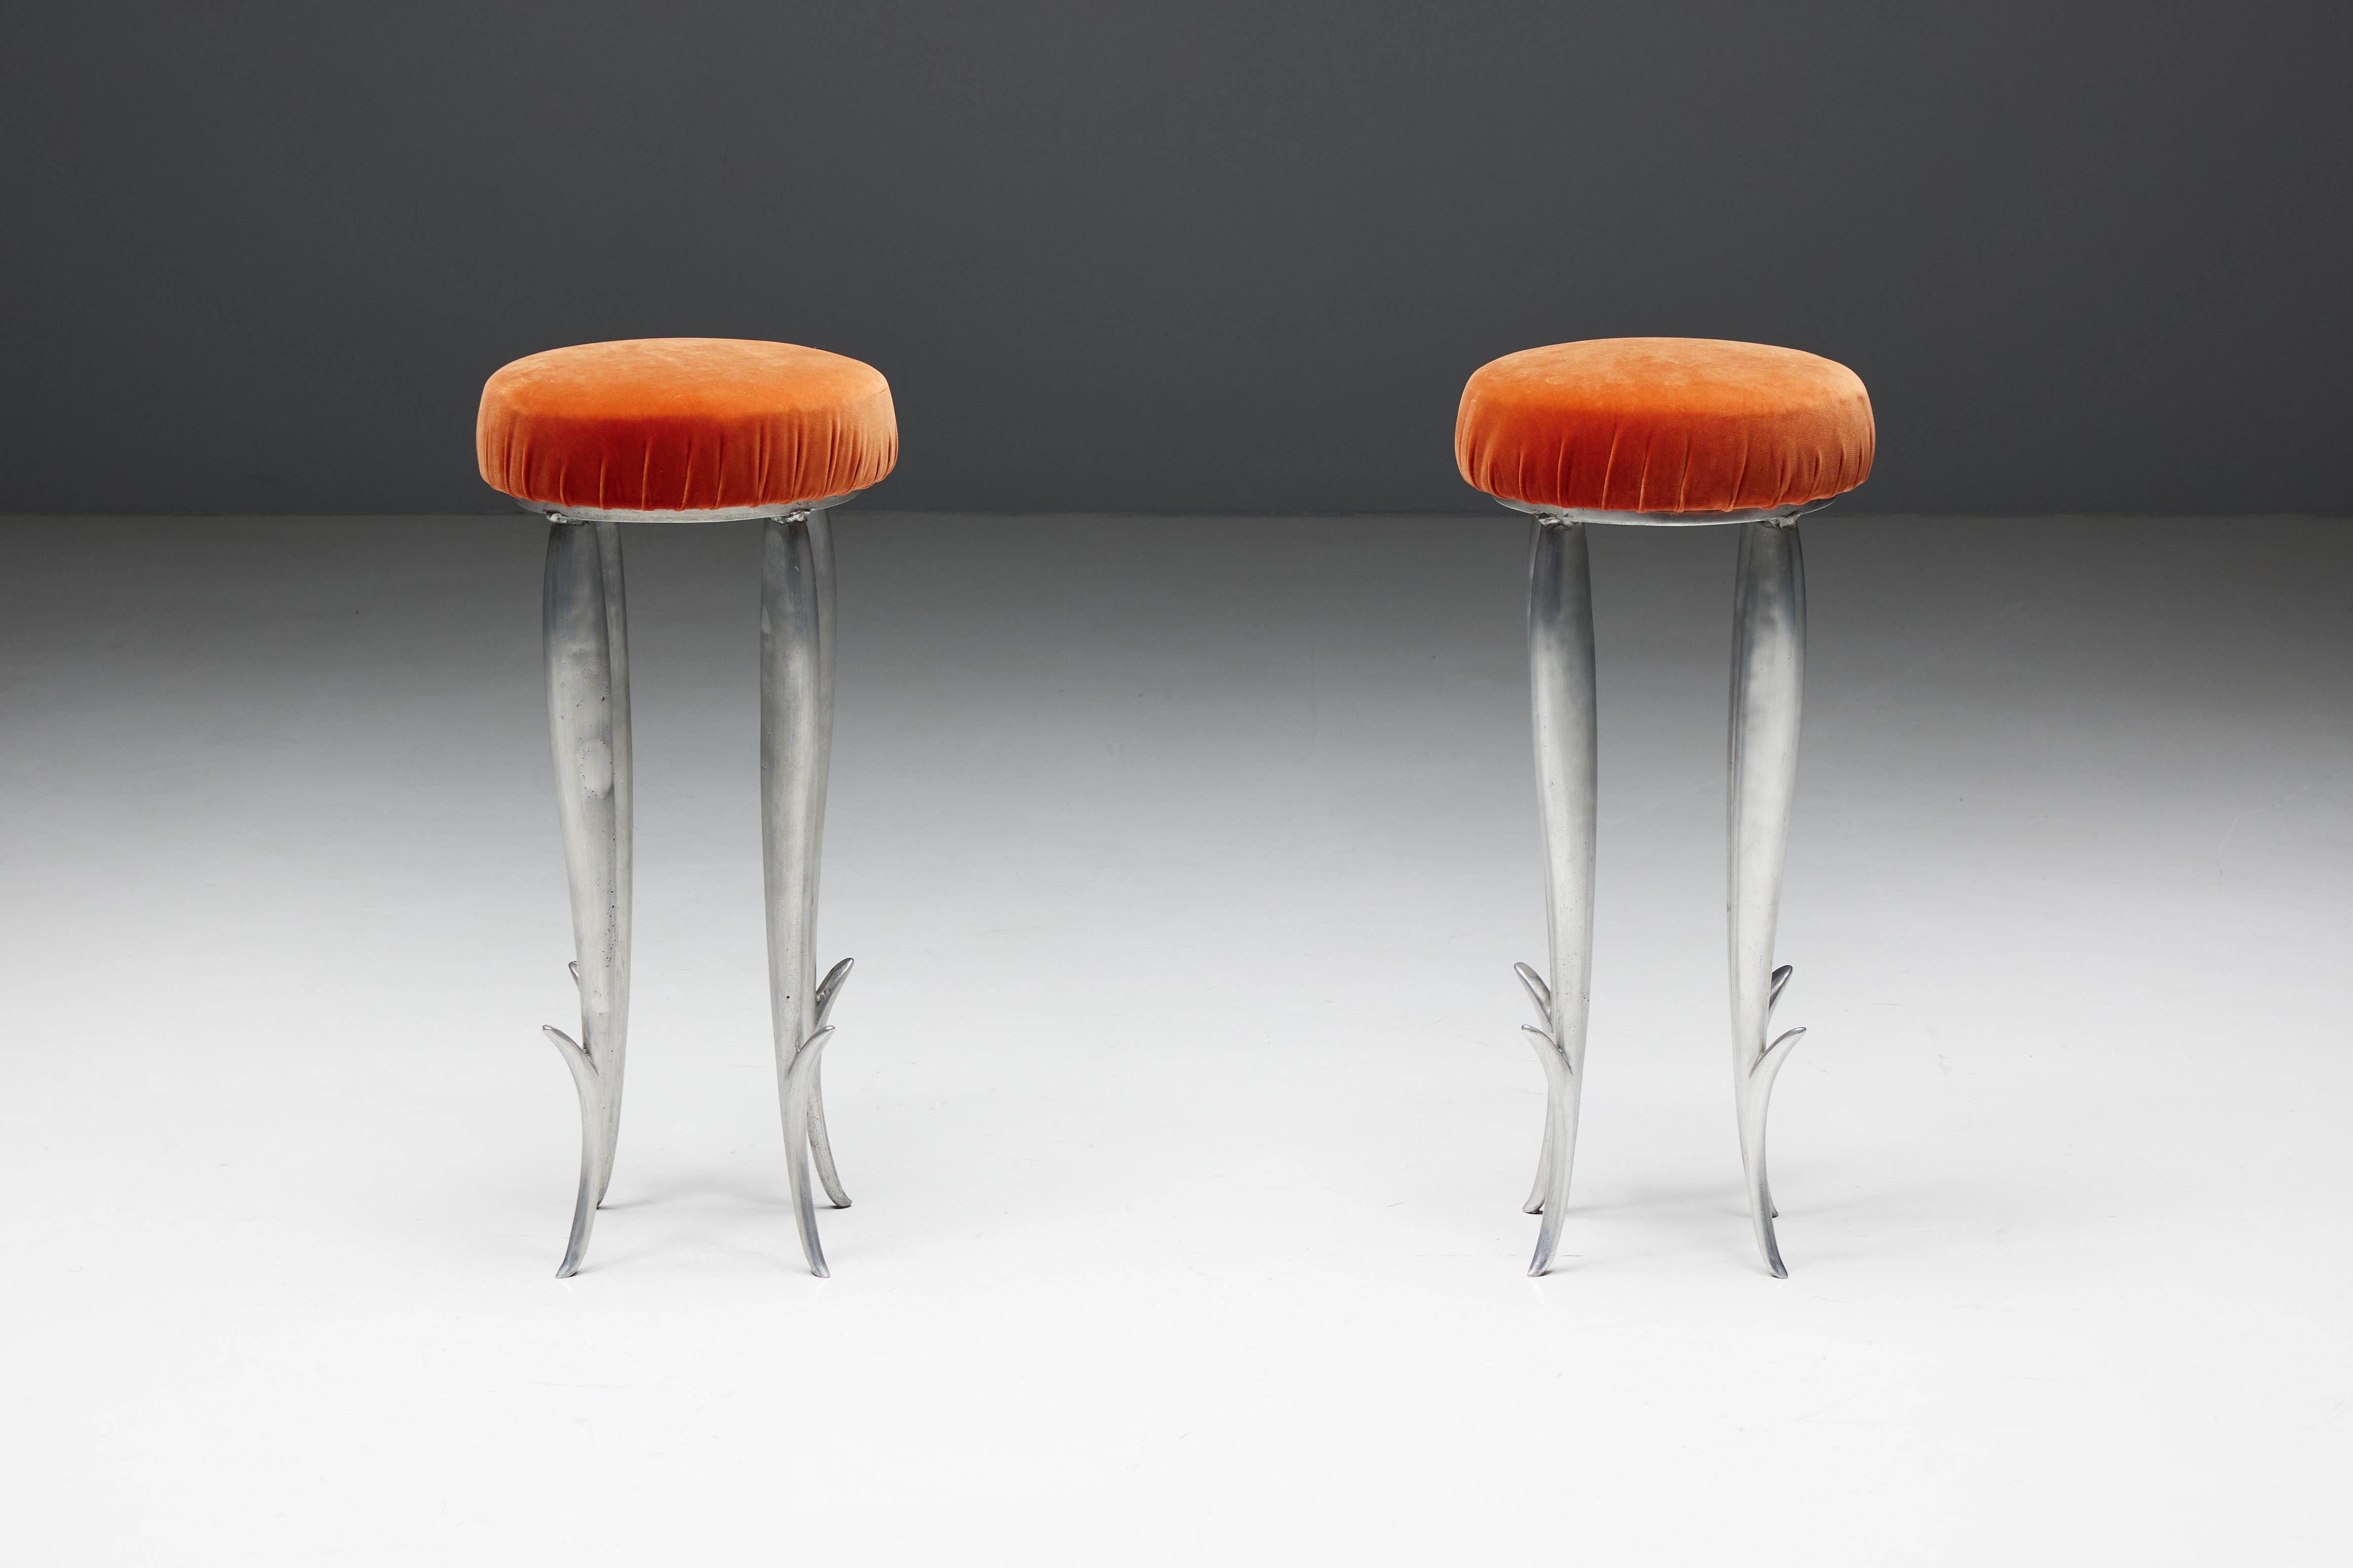 Royalton bar stools by Philippe Starck for XO, originally designed for the famous Royalton Hotel in New York. These stools embody the visionary style of acclaimed French designer Philippe Starck. Each stool has a sturdy cast aluminum base and the